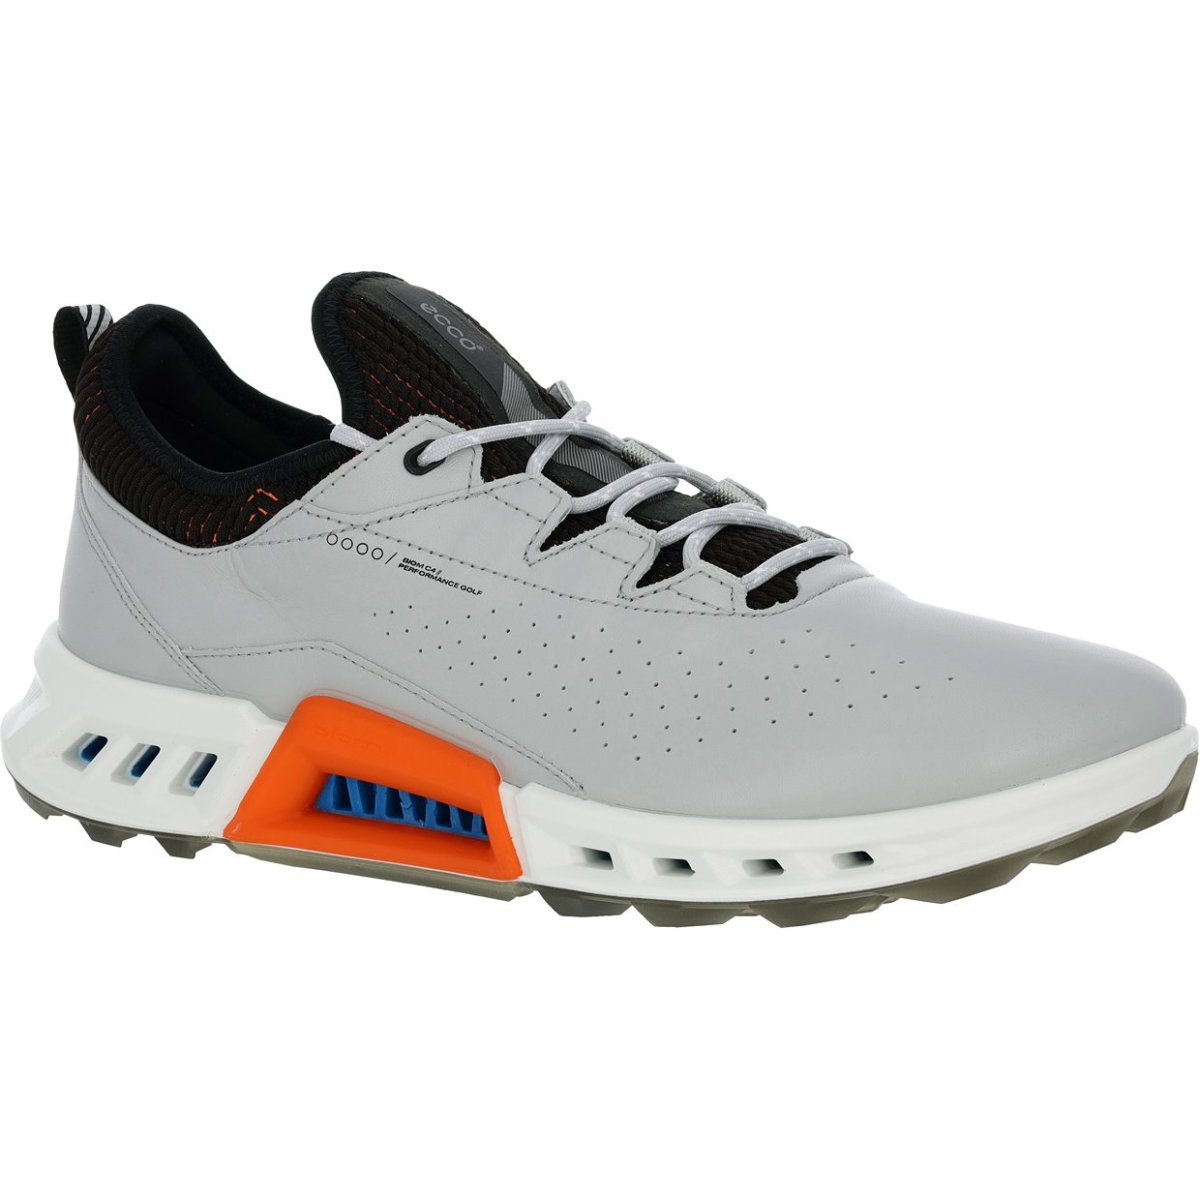 Shop the latest ECCO golf shoes - like the Biom C4 - on Morning Read's pro shop.